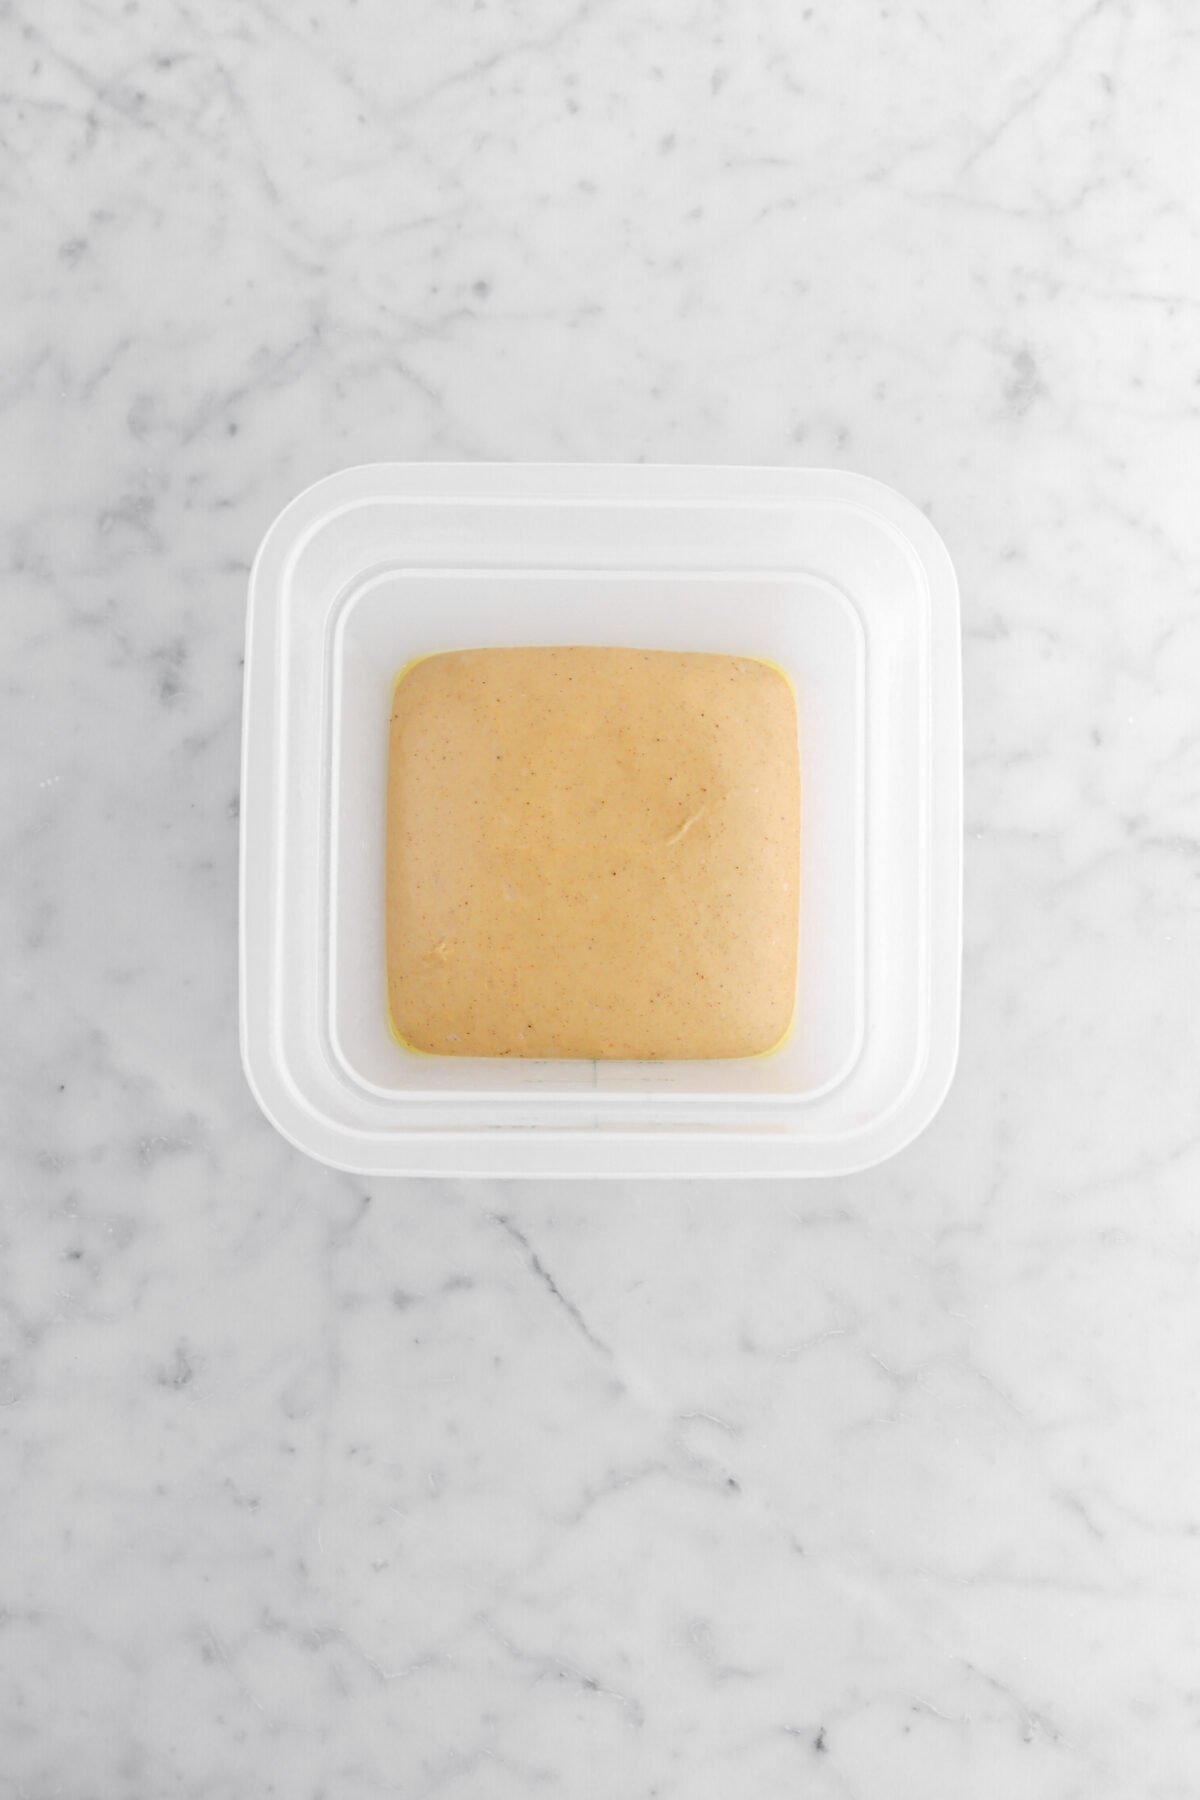 proved dough in square plastic container.